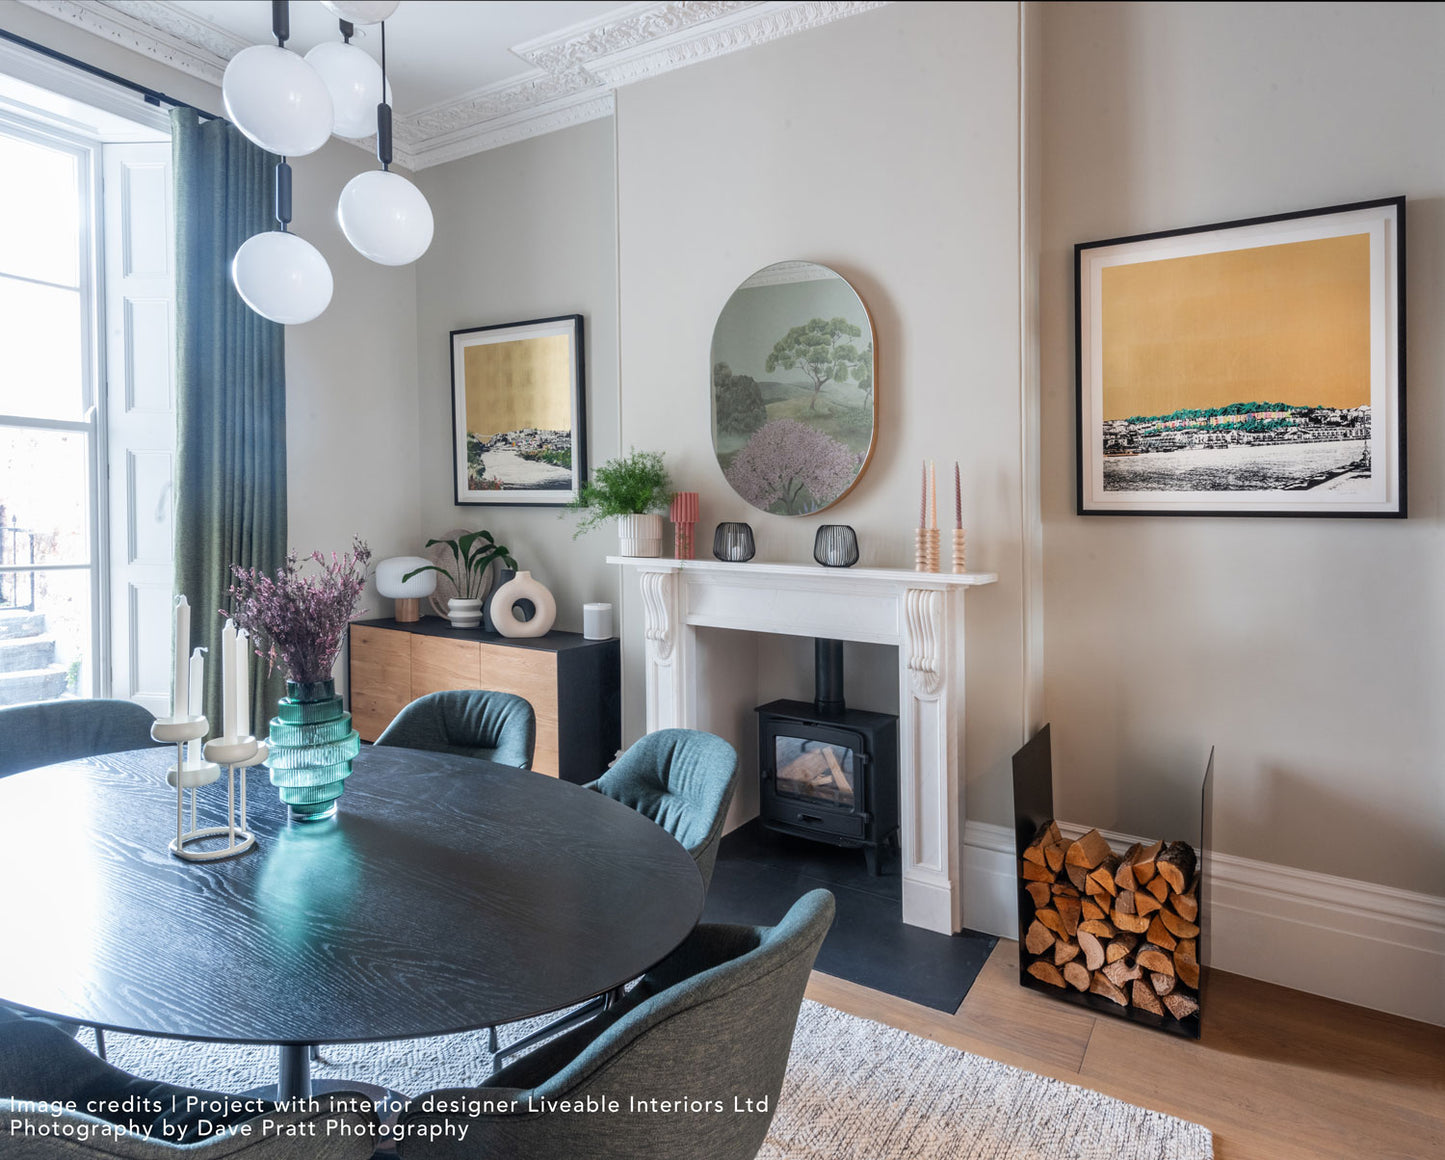 Smithson Projects | Jayson Lilley’s artwork in situ, courtesy and copyright © of interior designer Liveable Interiors Ltd from our project together, Photography credit Dave Pratt Photography 